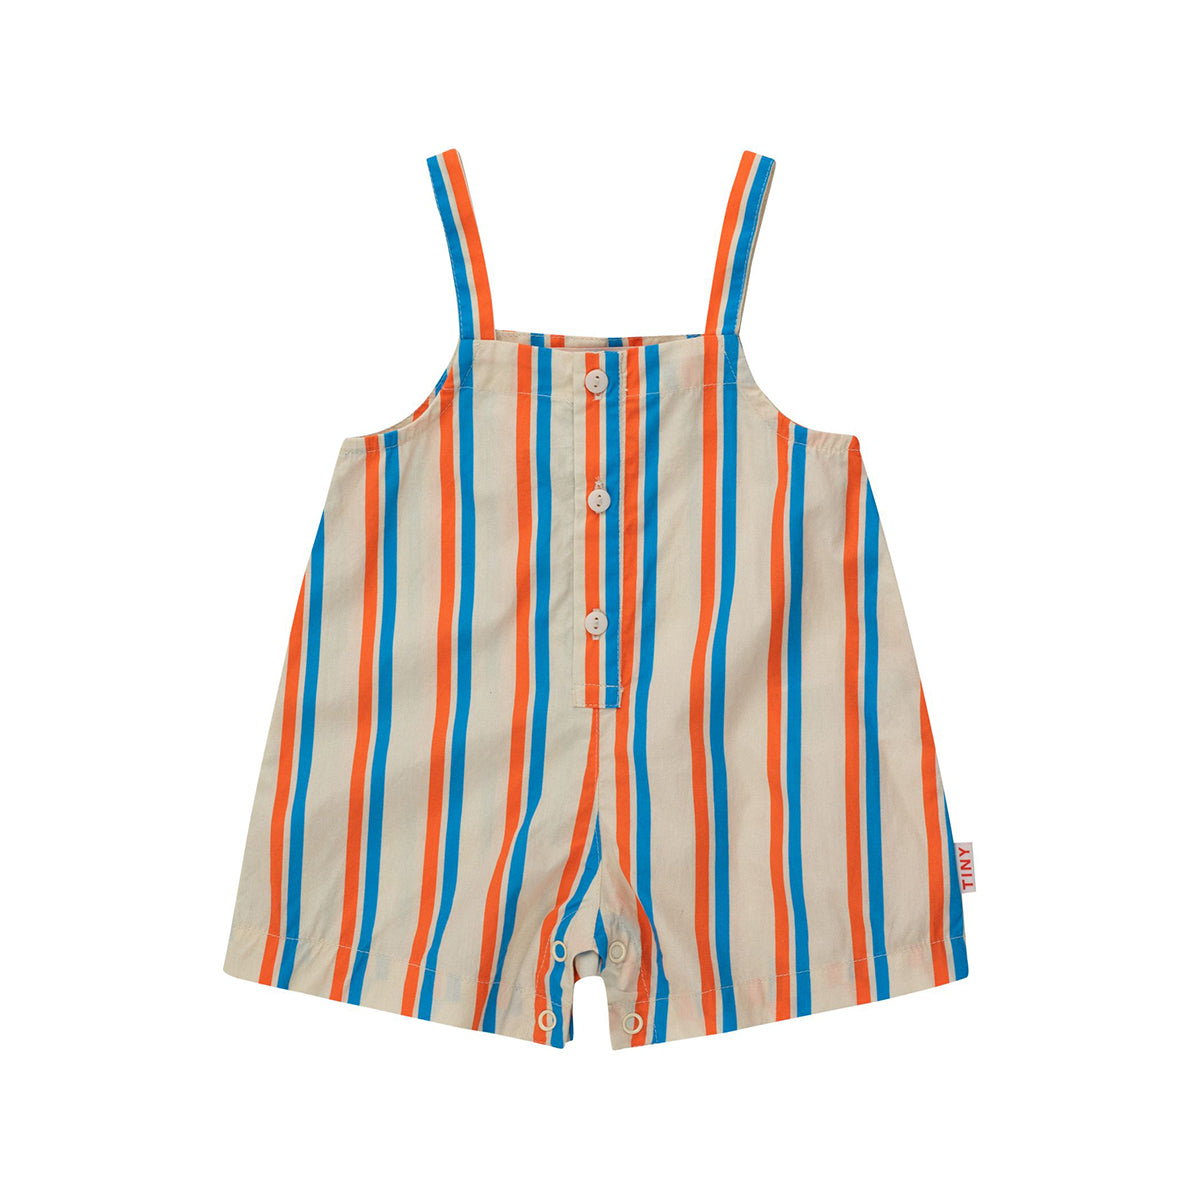 tinycottons-tiny-cottons-retro-line-baby-dungaree